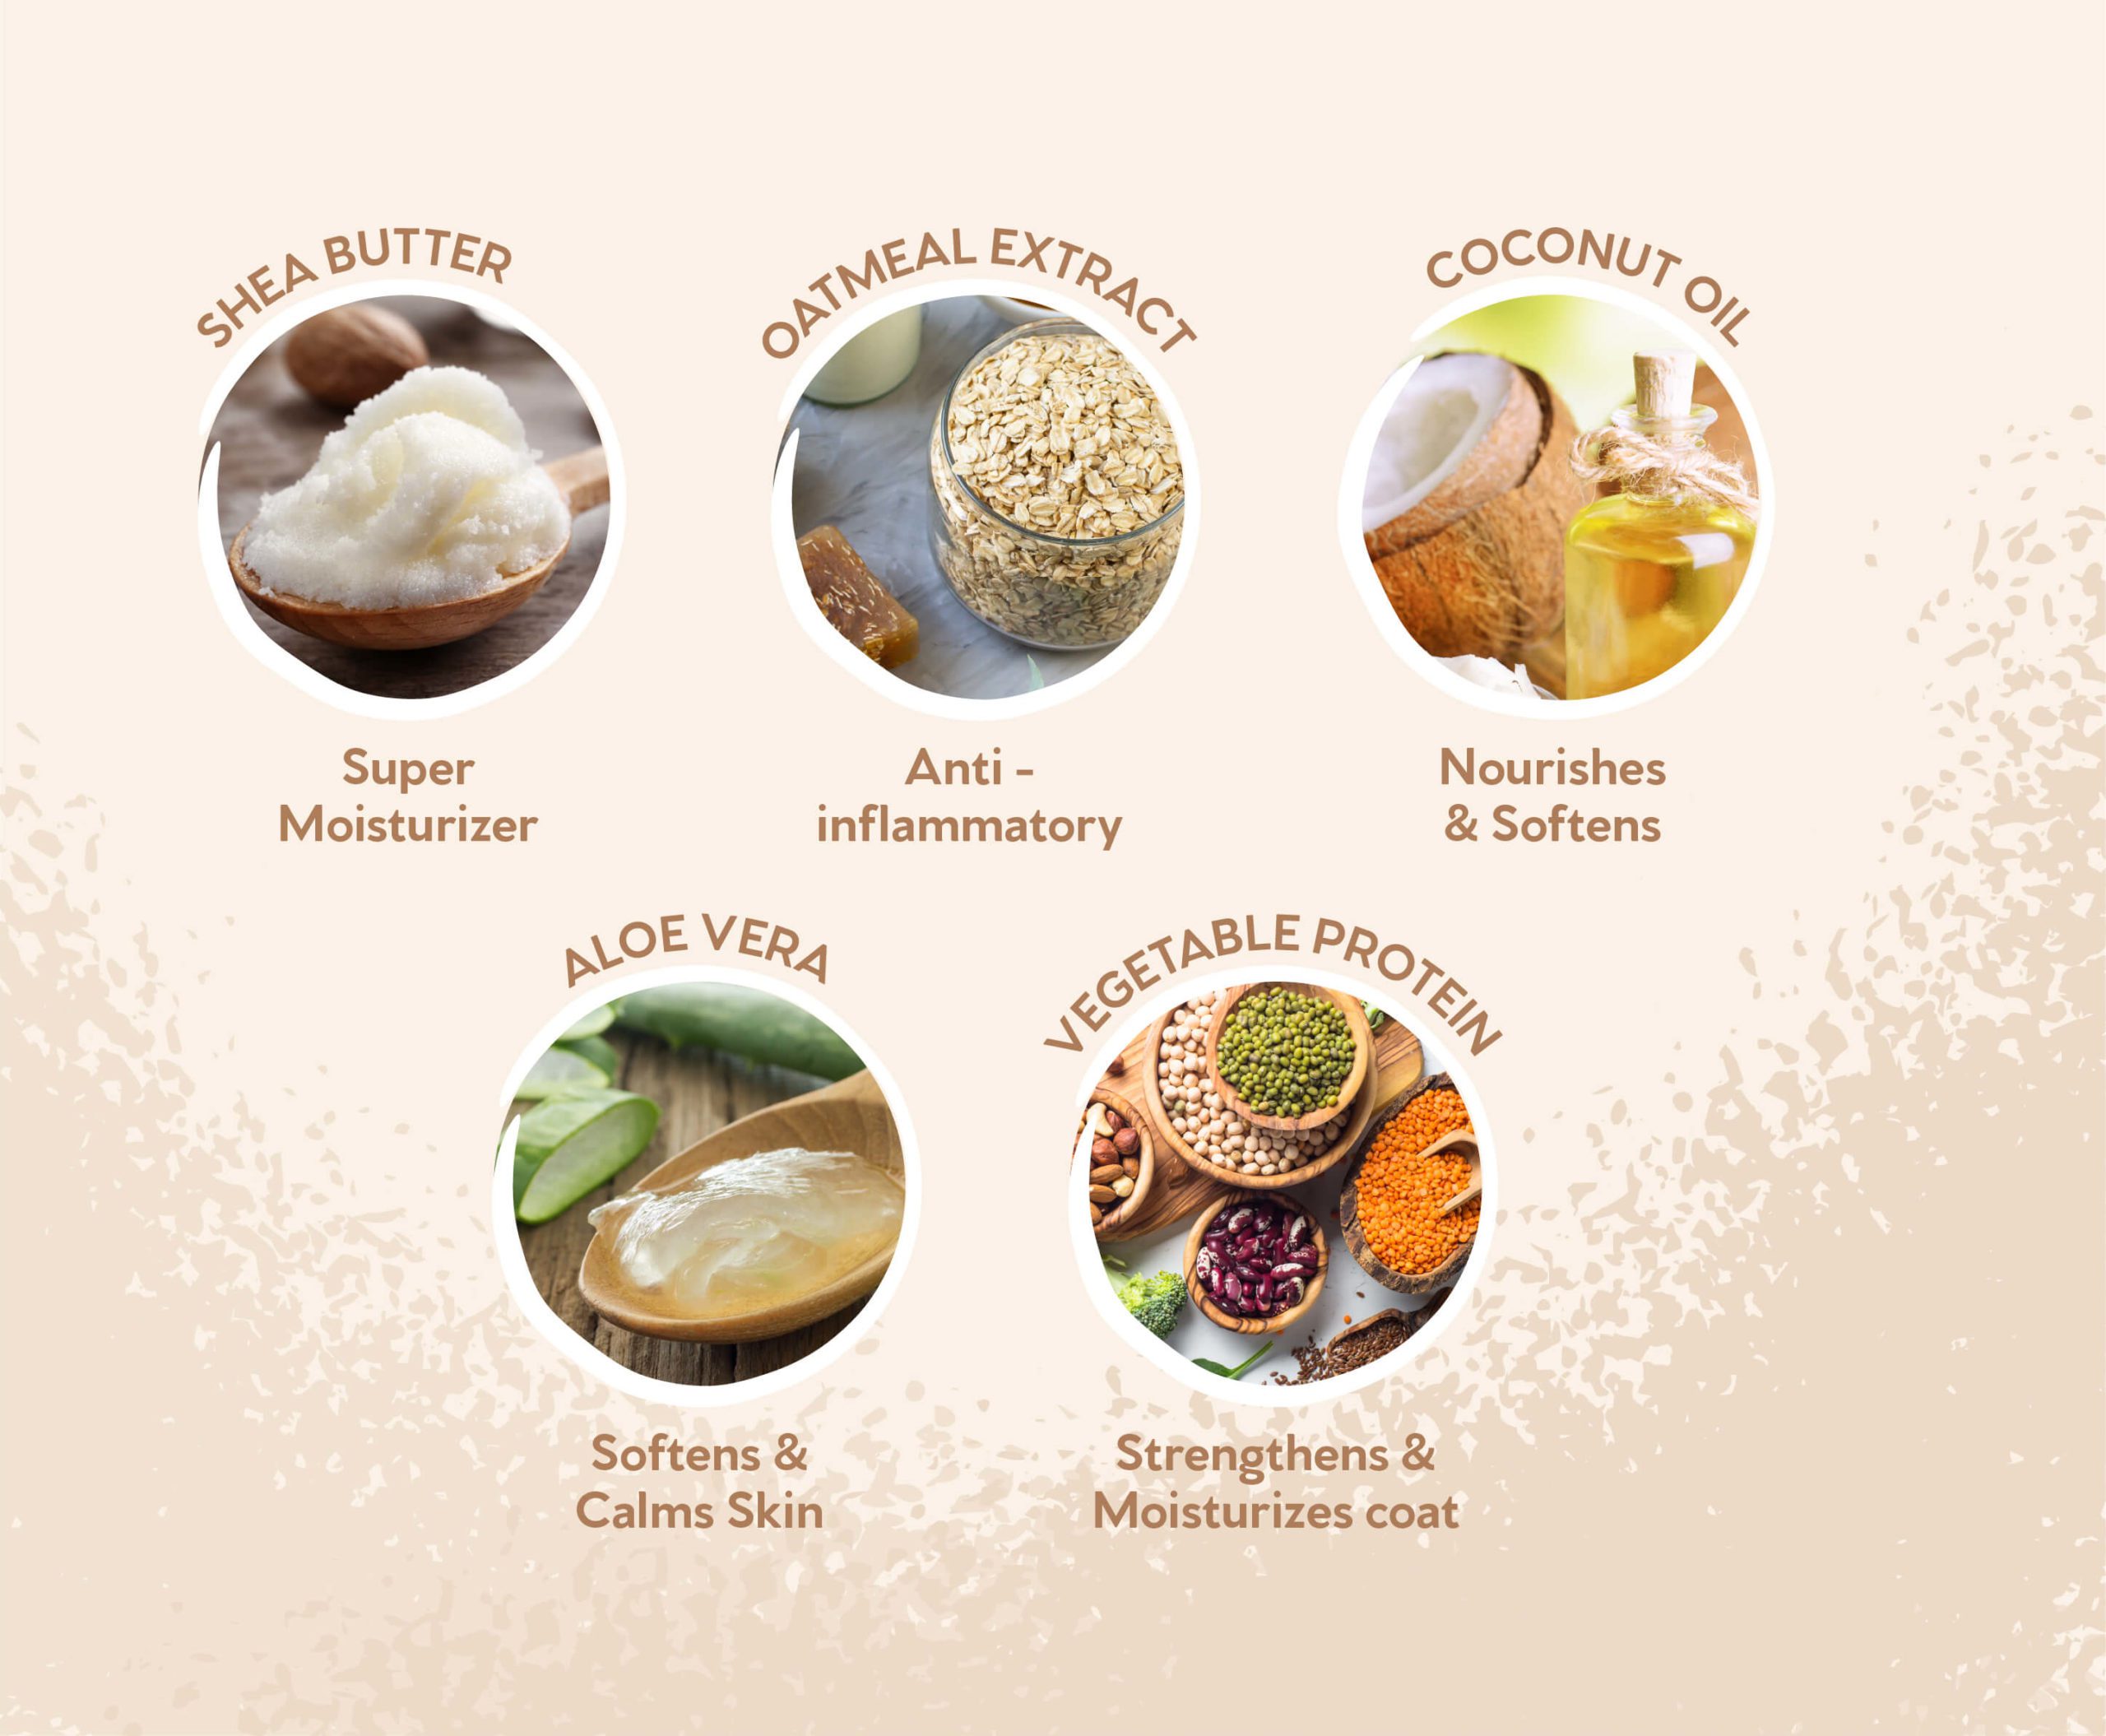 Shea butter, Oatmeal extract, coconut oil, Aloe Vera and Vegetable proteins icons